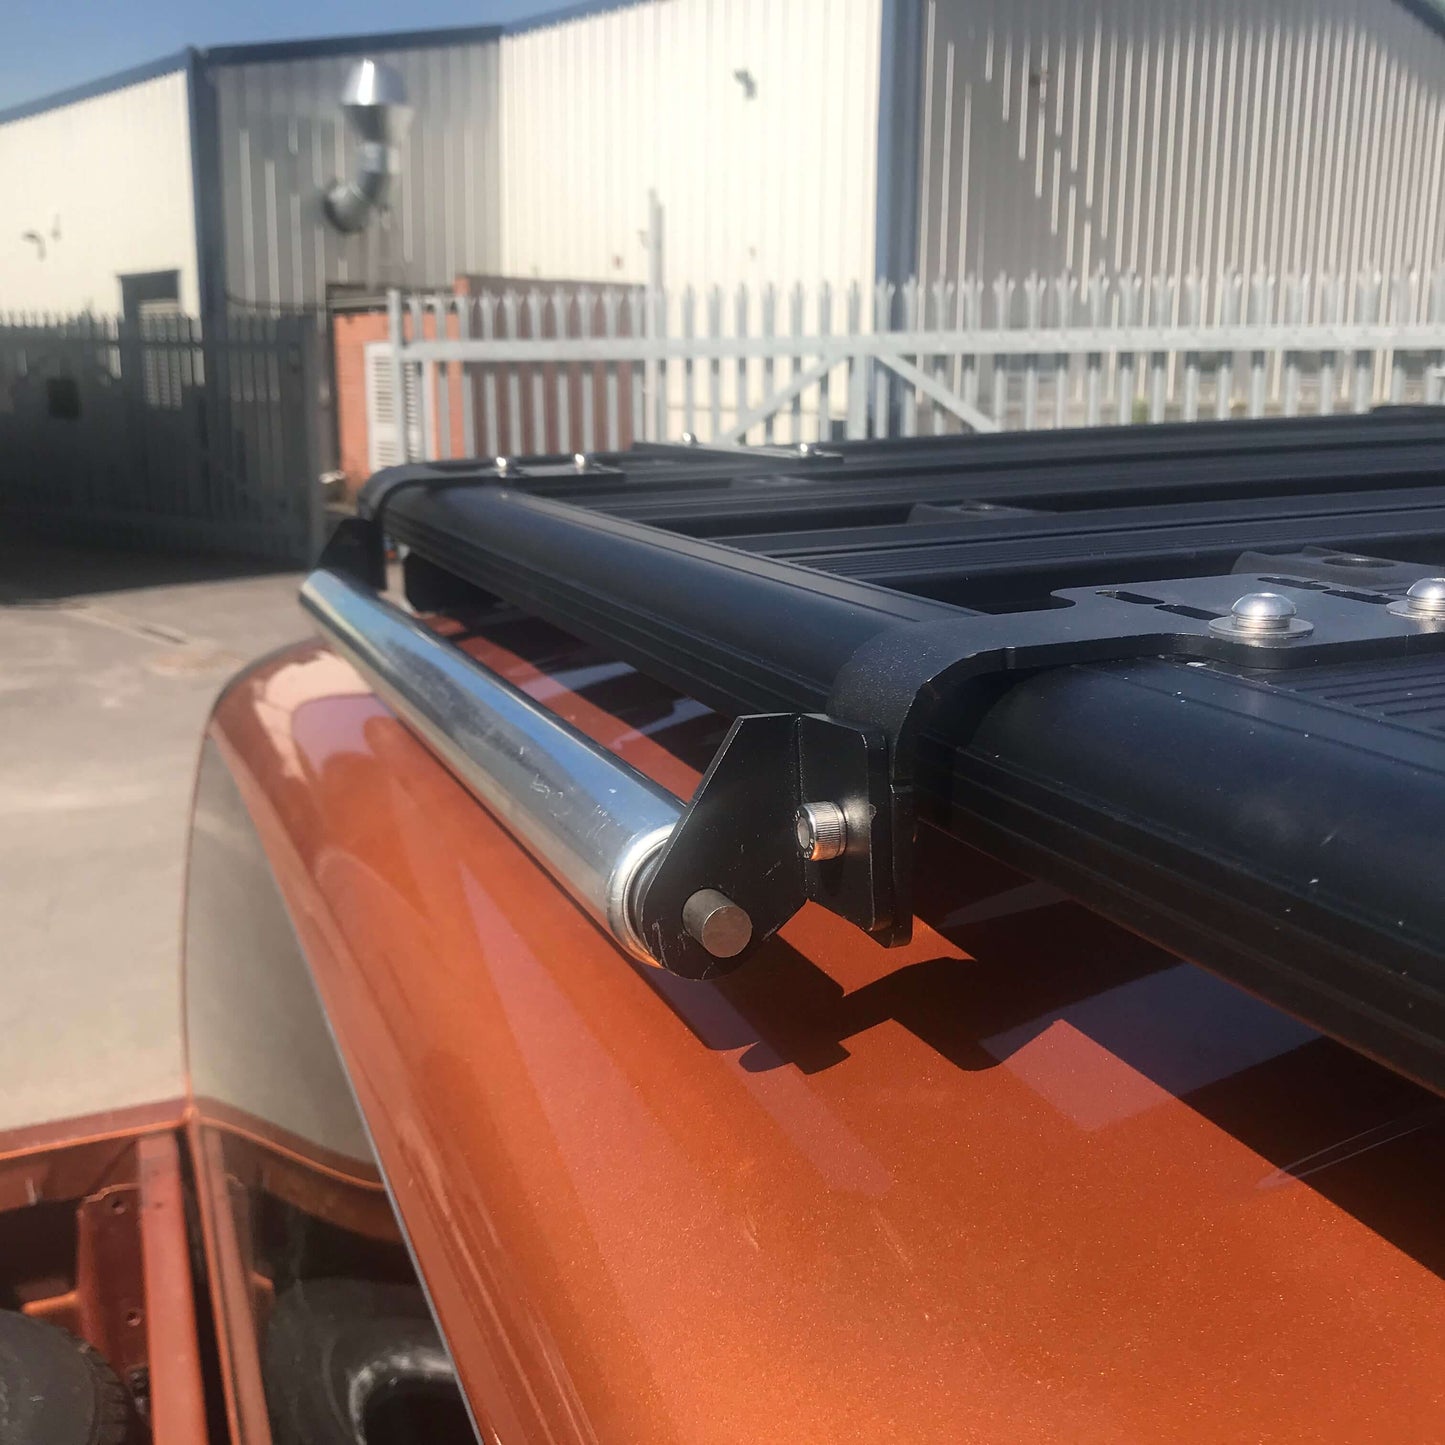 Ladder Cargo Roller Bar Kit for Direct4x4 AluMod Low Profile Roof Racks -  - sold by Direct4x4